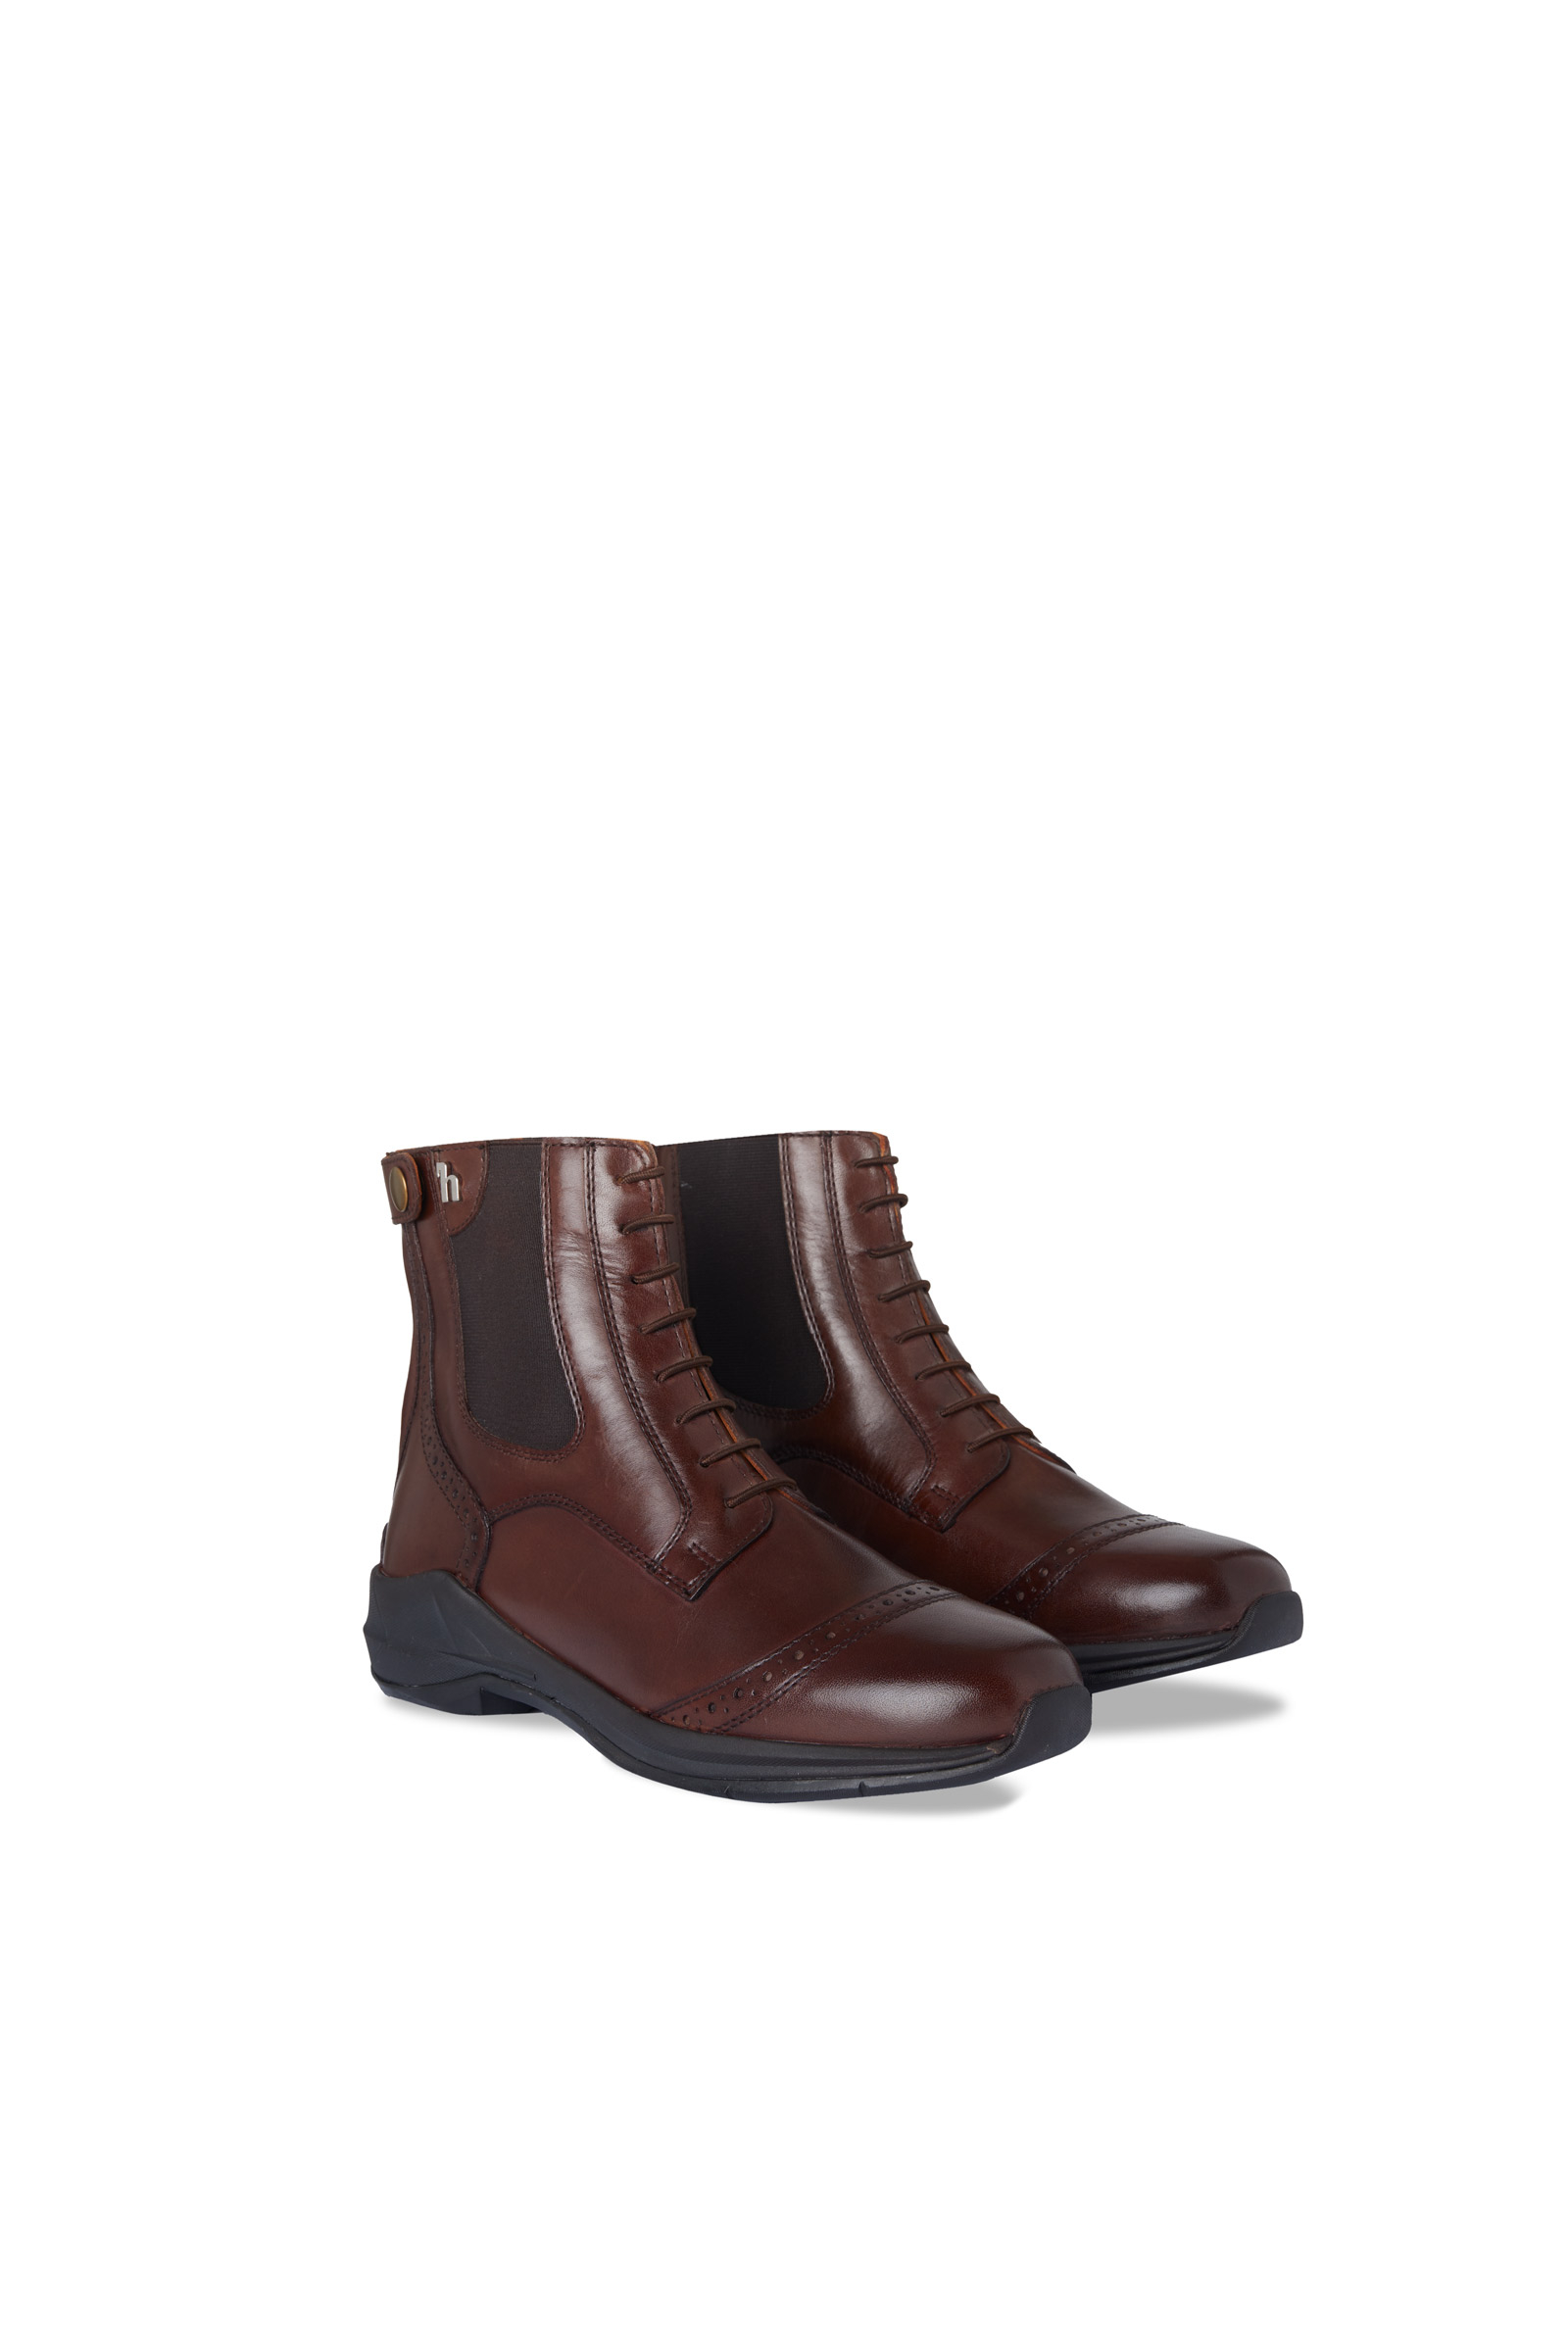 Turnout Boots – Laxxis International